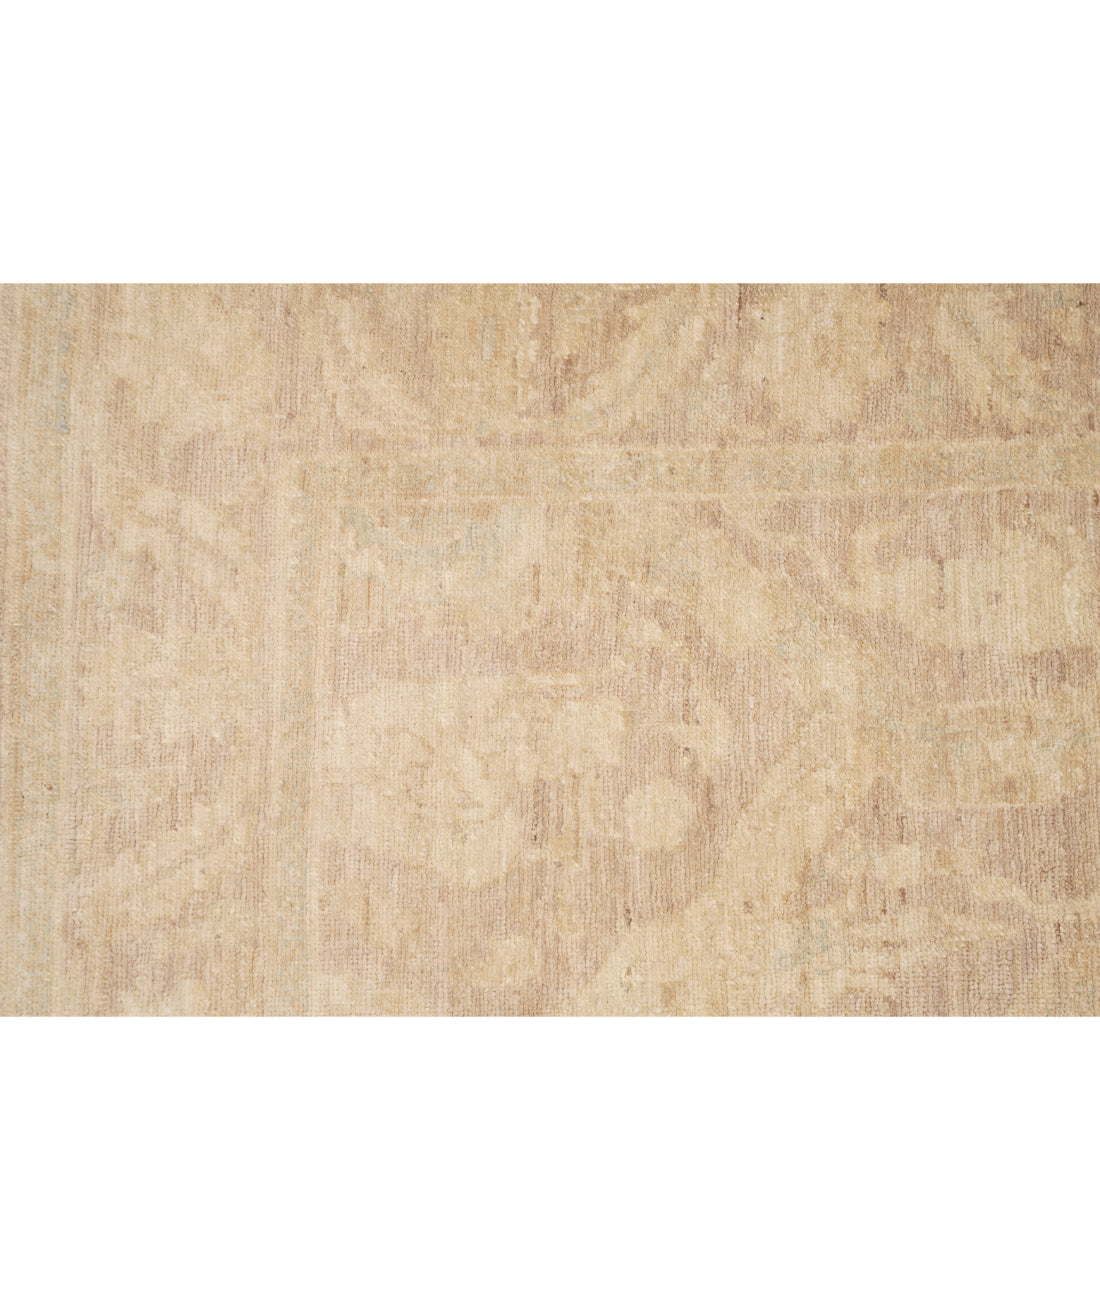 Hand Knotted Serenity Wool Rug - 3'1'' x 11'1'' 3' 1" X 11' 1" (94 X 338) / Grey / Ivory